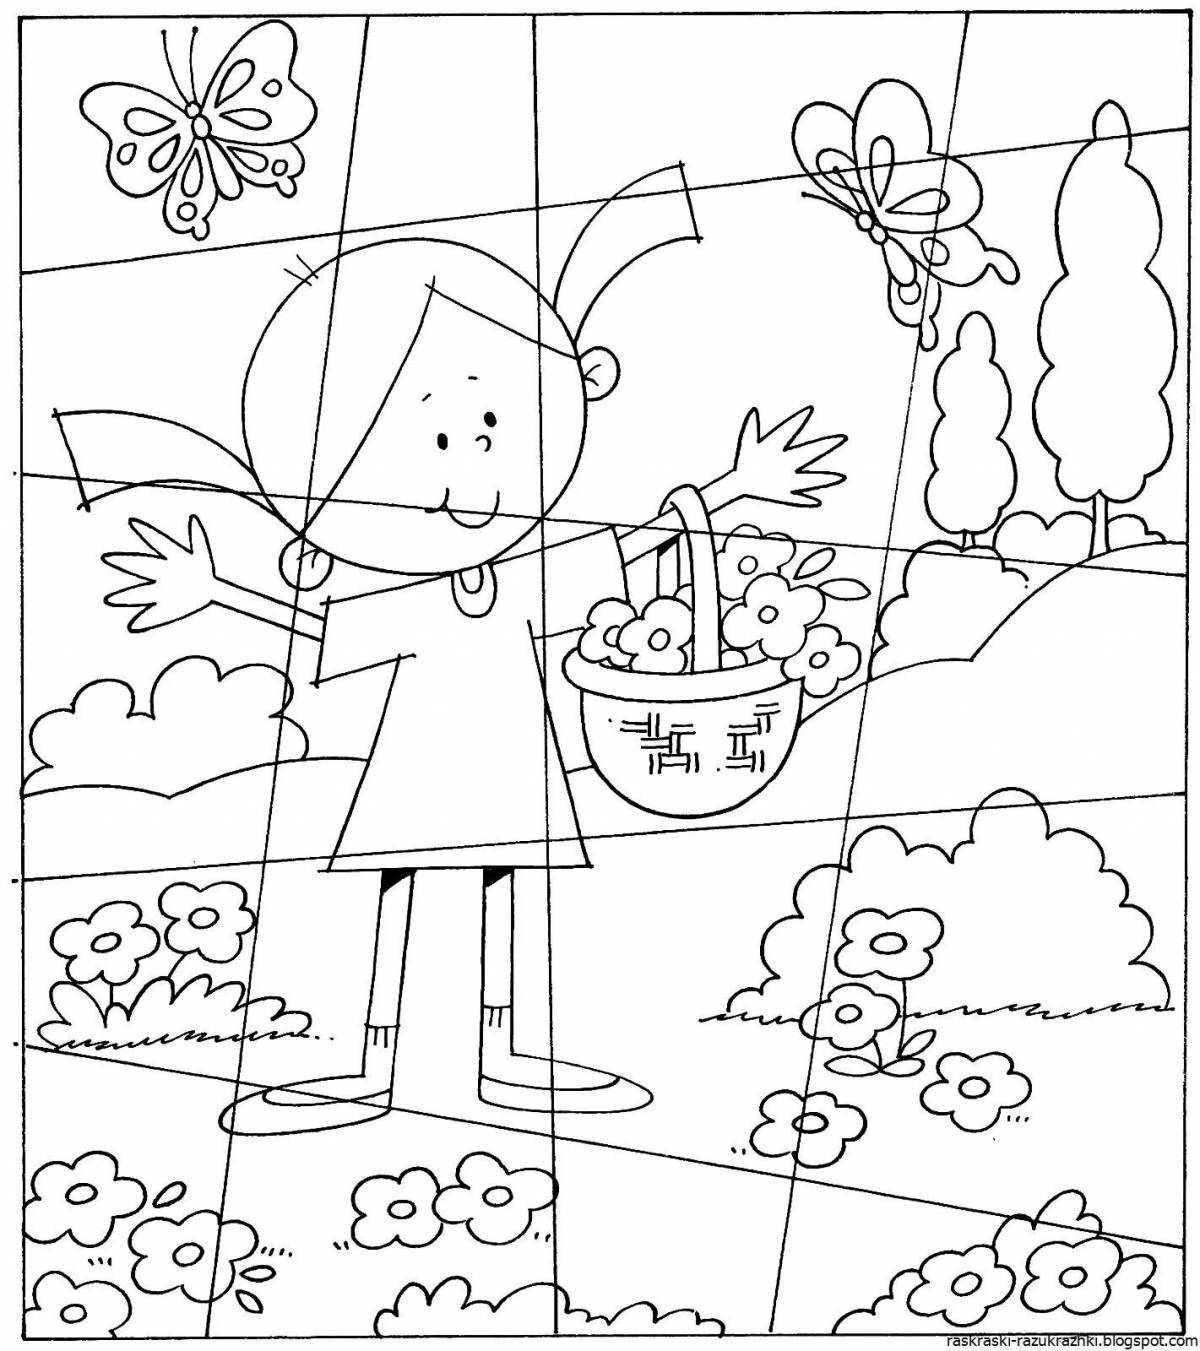 Colorful coloring puzzles and cut-outs